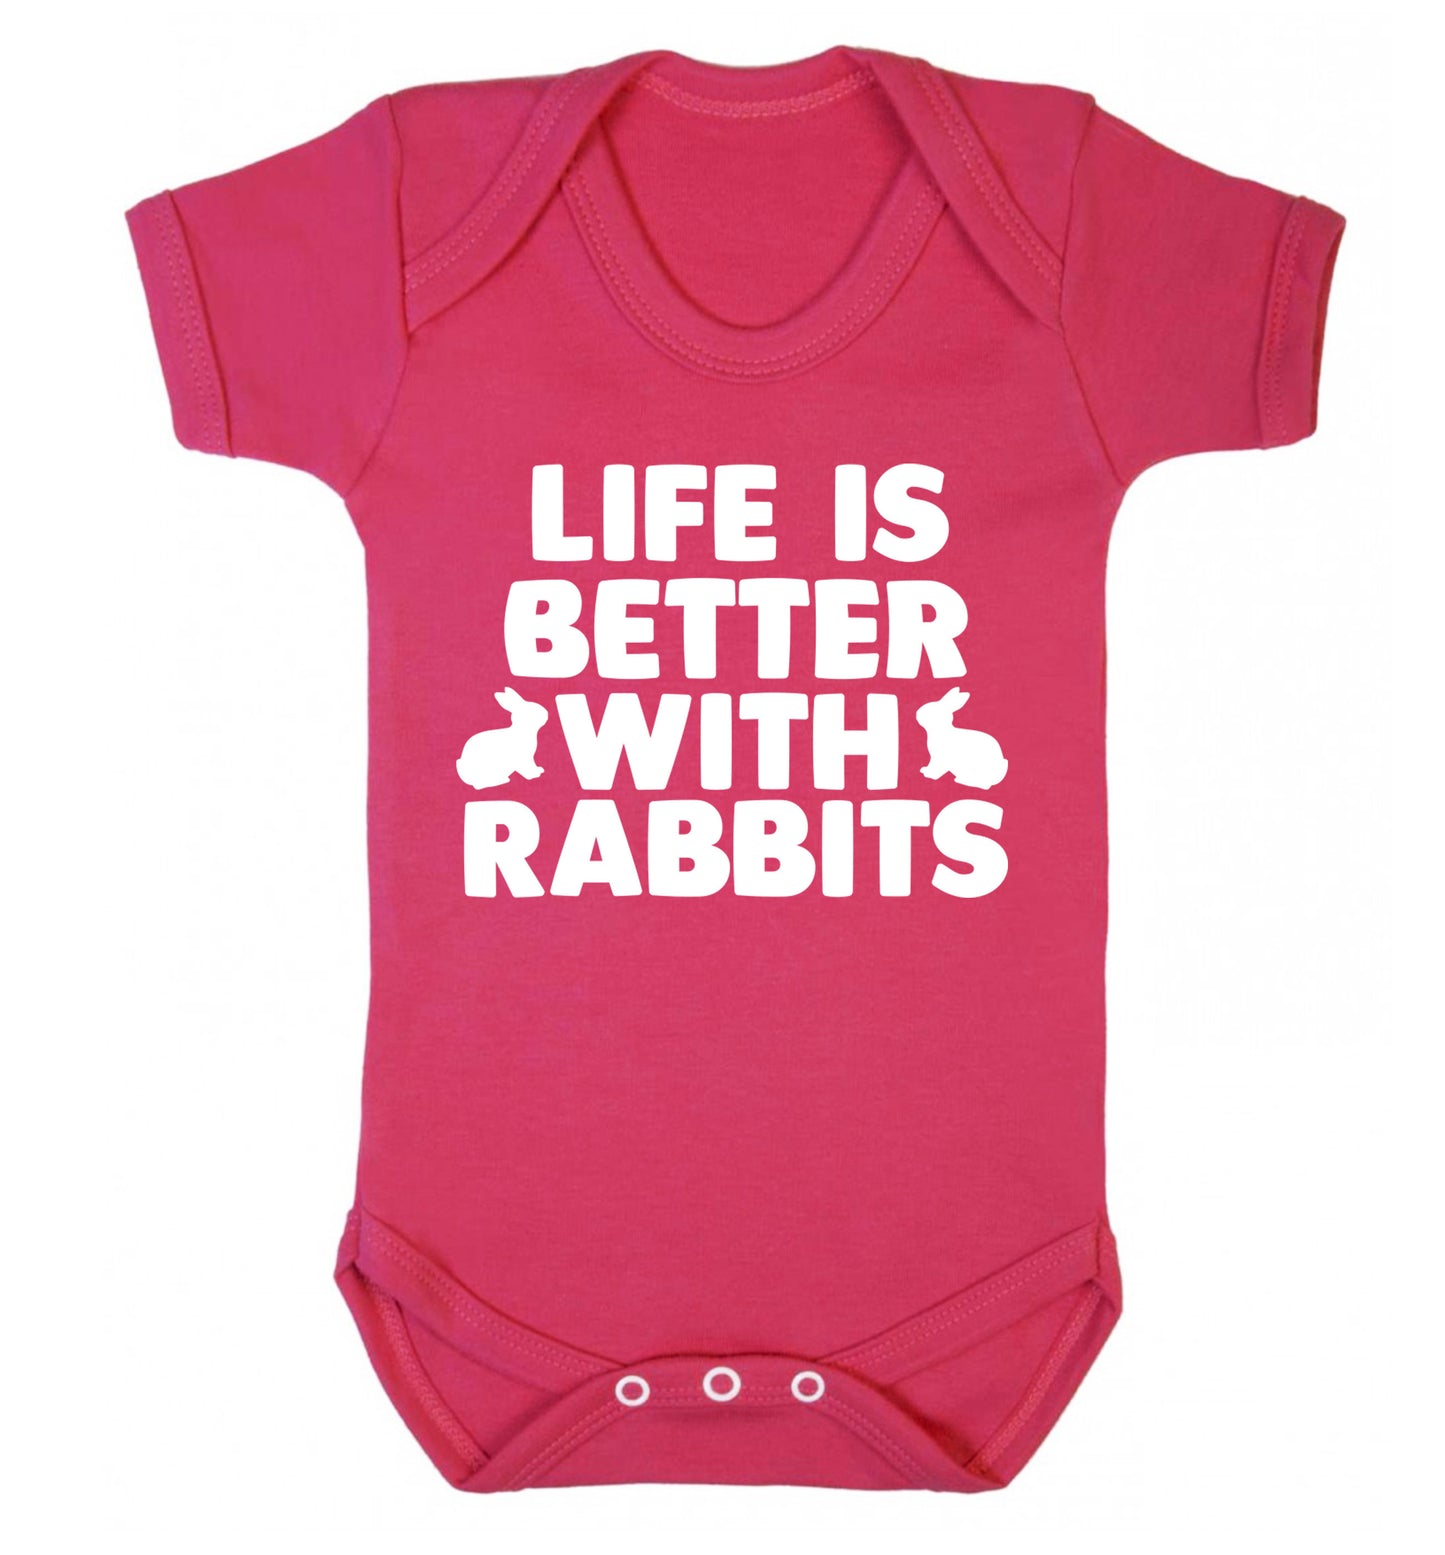 Life is better with rabbits Baby Vest dark pink 18-24 months